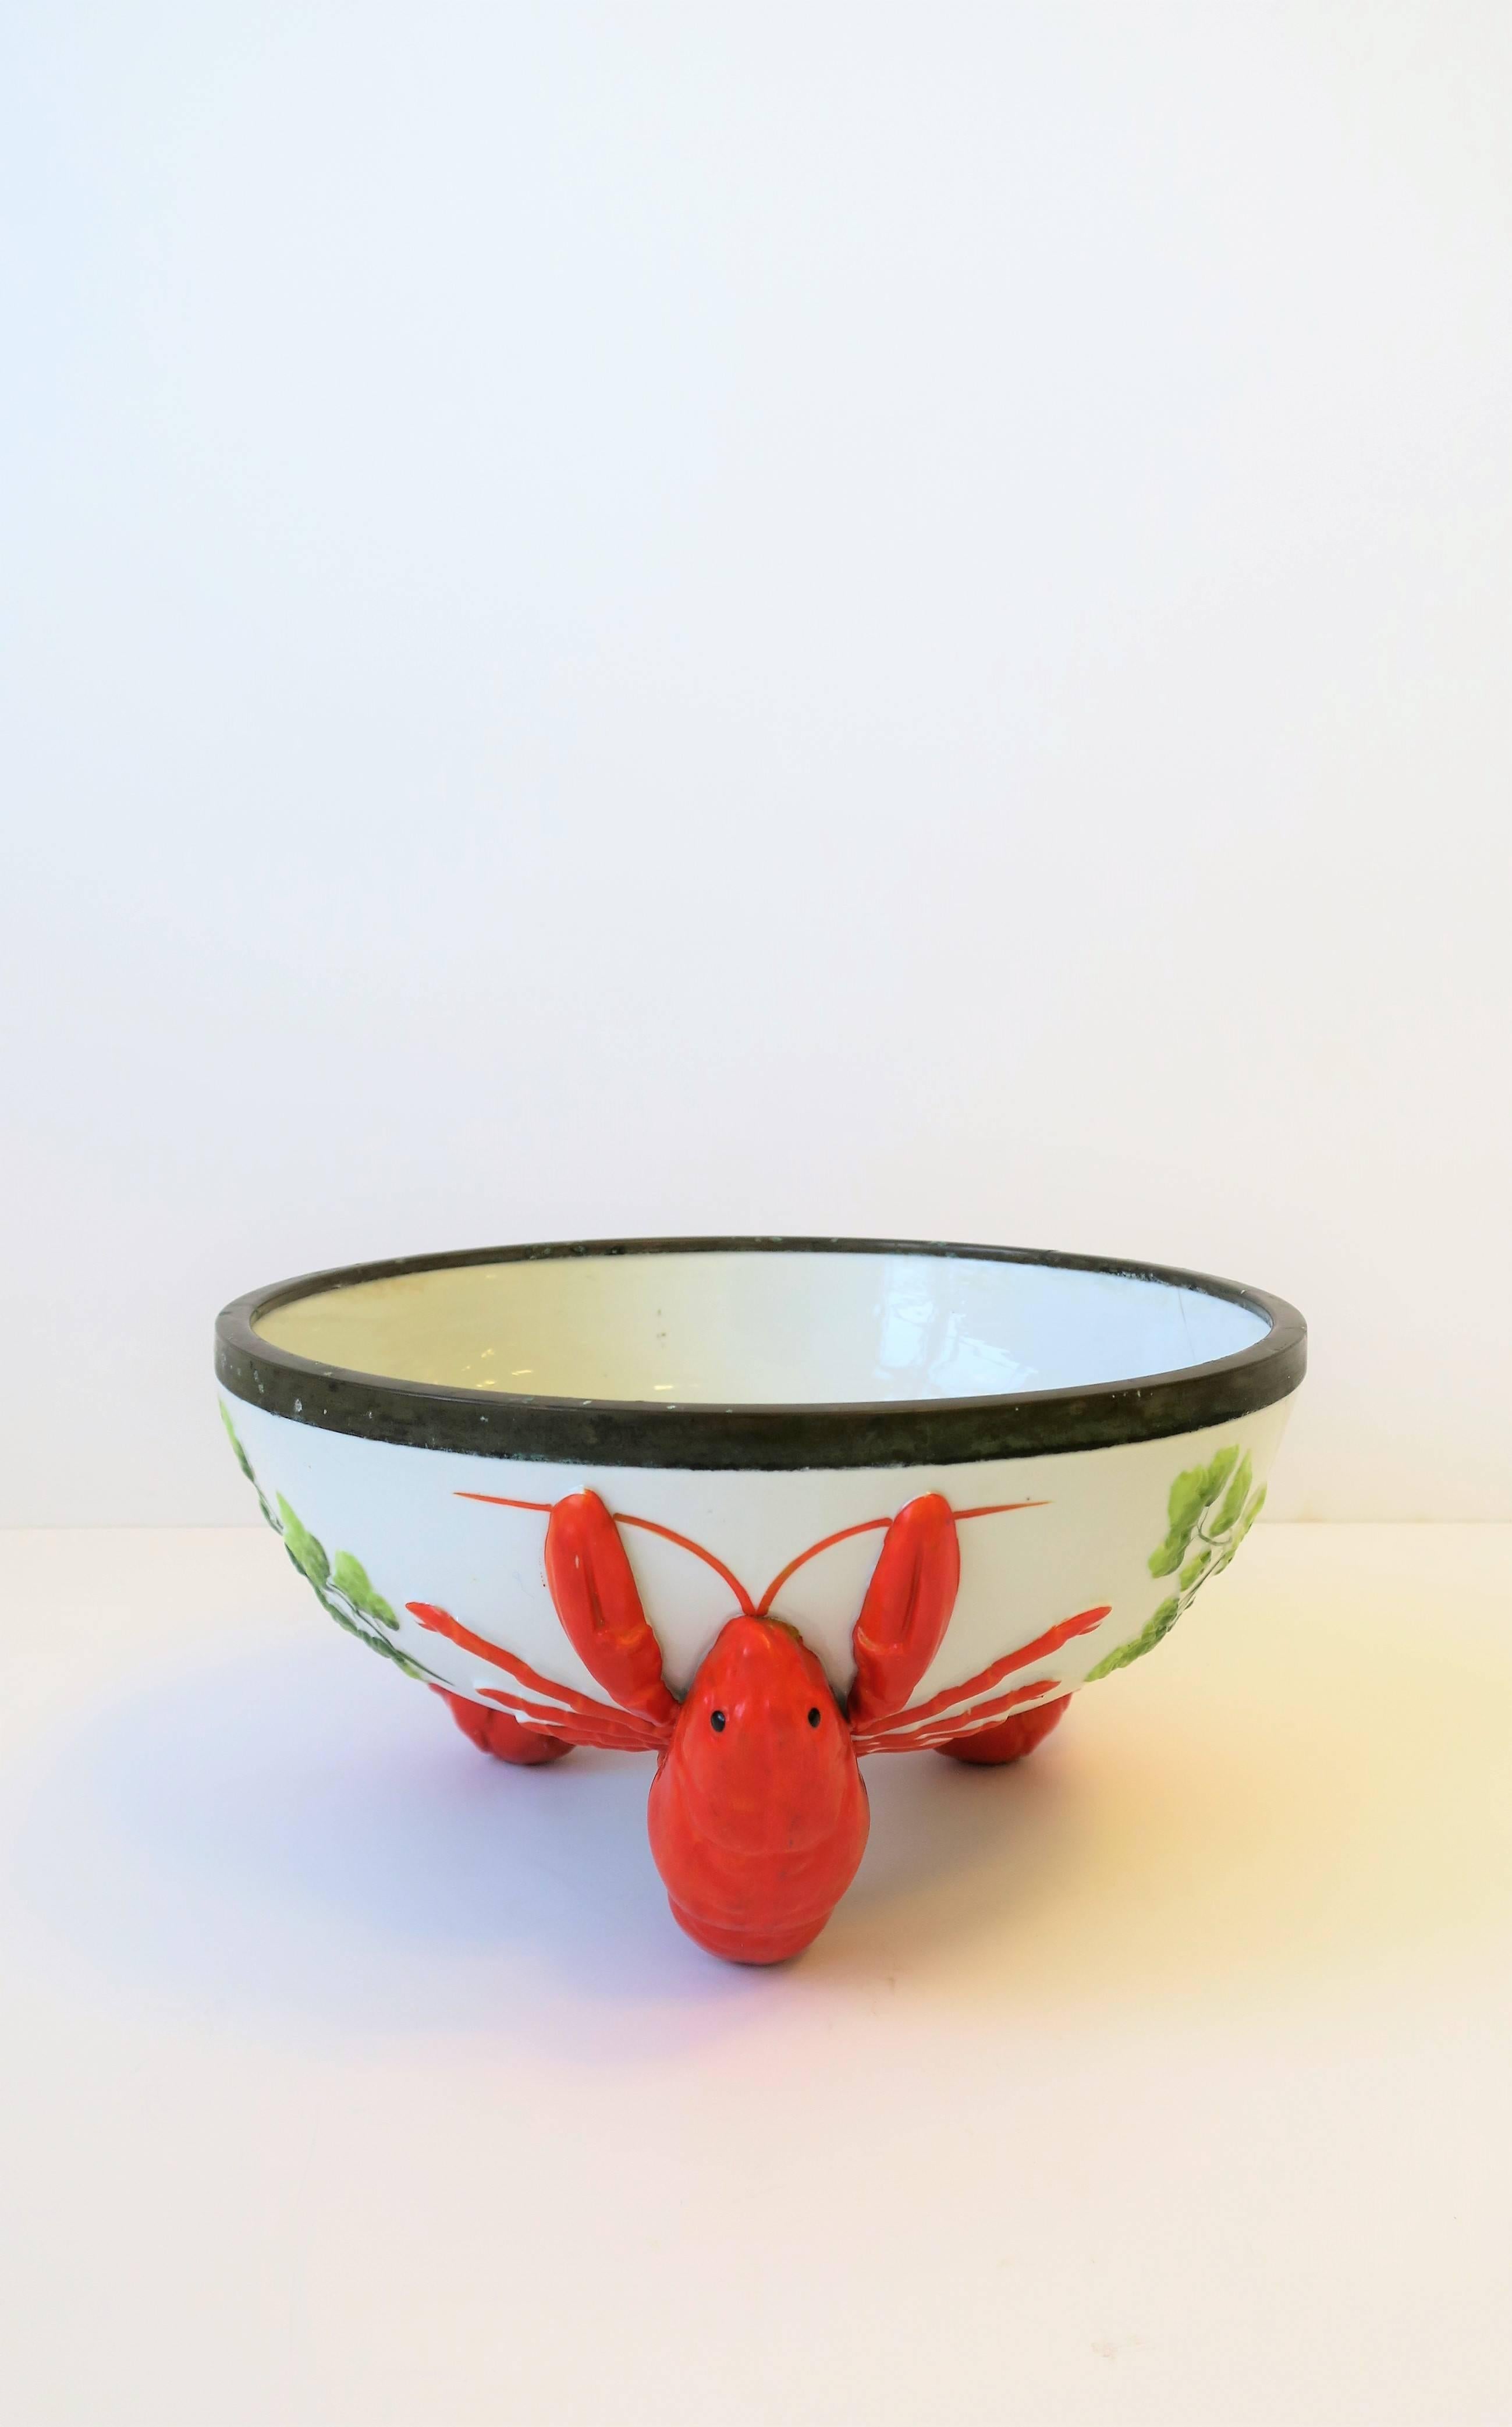 A beautiful vintage French Limoges Majolica style lobster decorated serving bowl with brass rim, circa Mid-20th century, France. Brass rim serves as a protective barrier to the ceramic bowl edge. This brass rim has a beautiful patina as show in